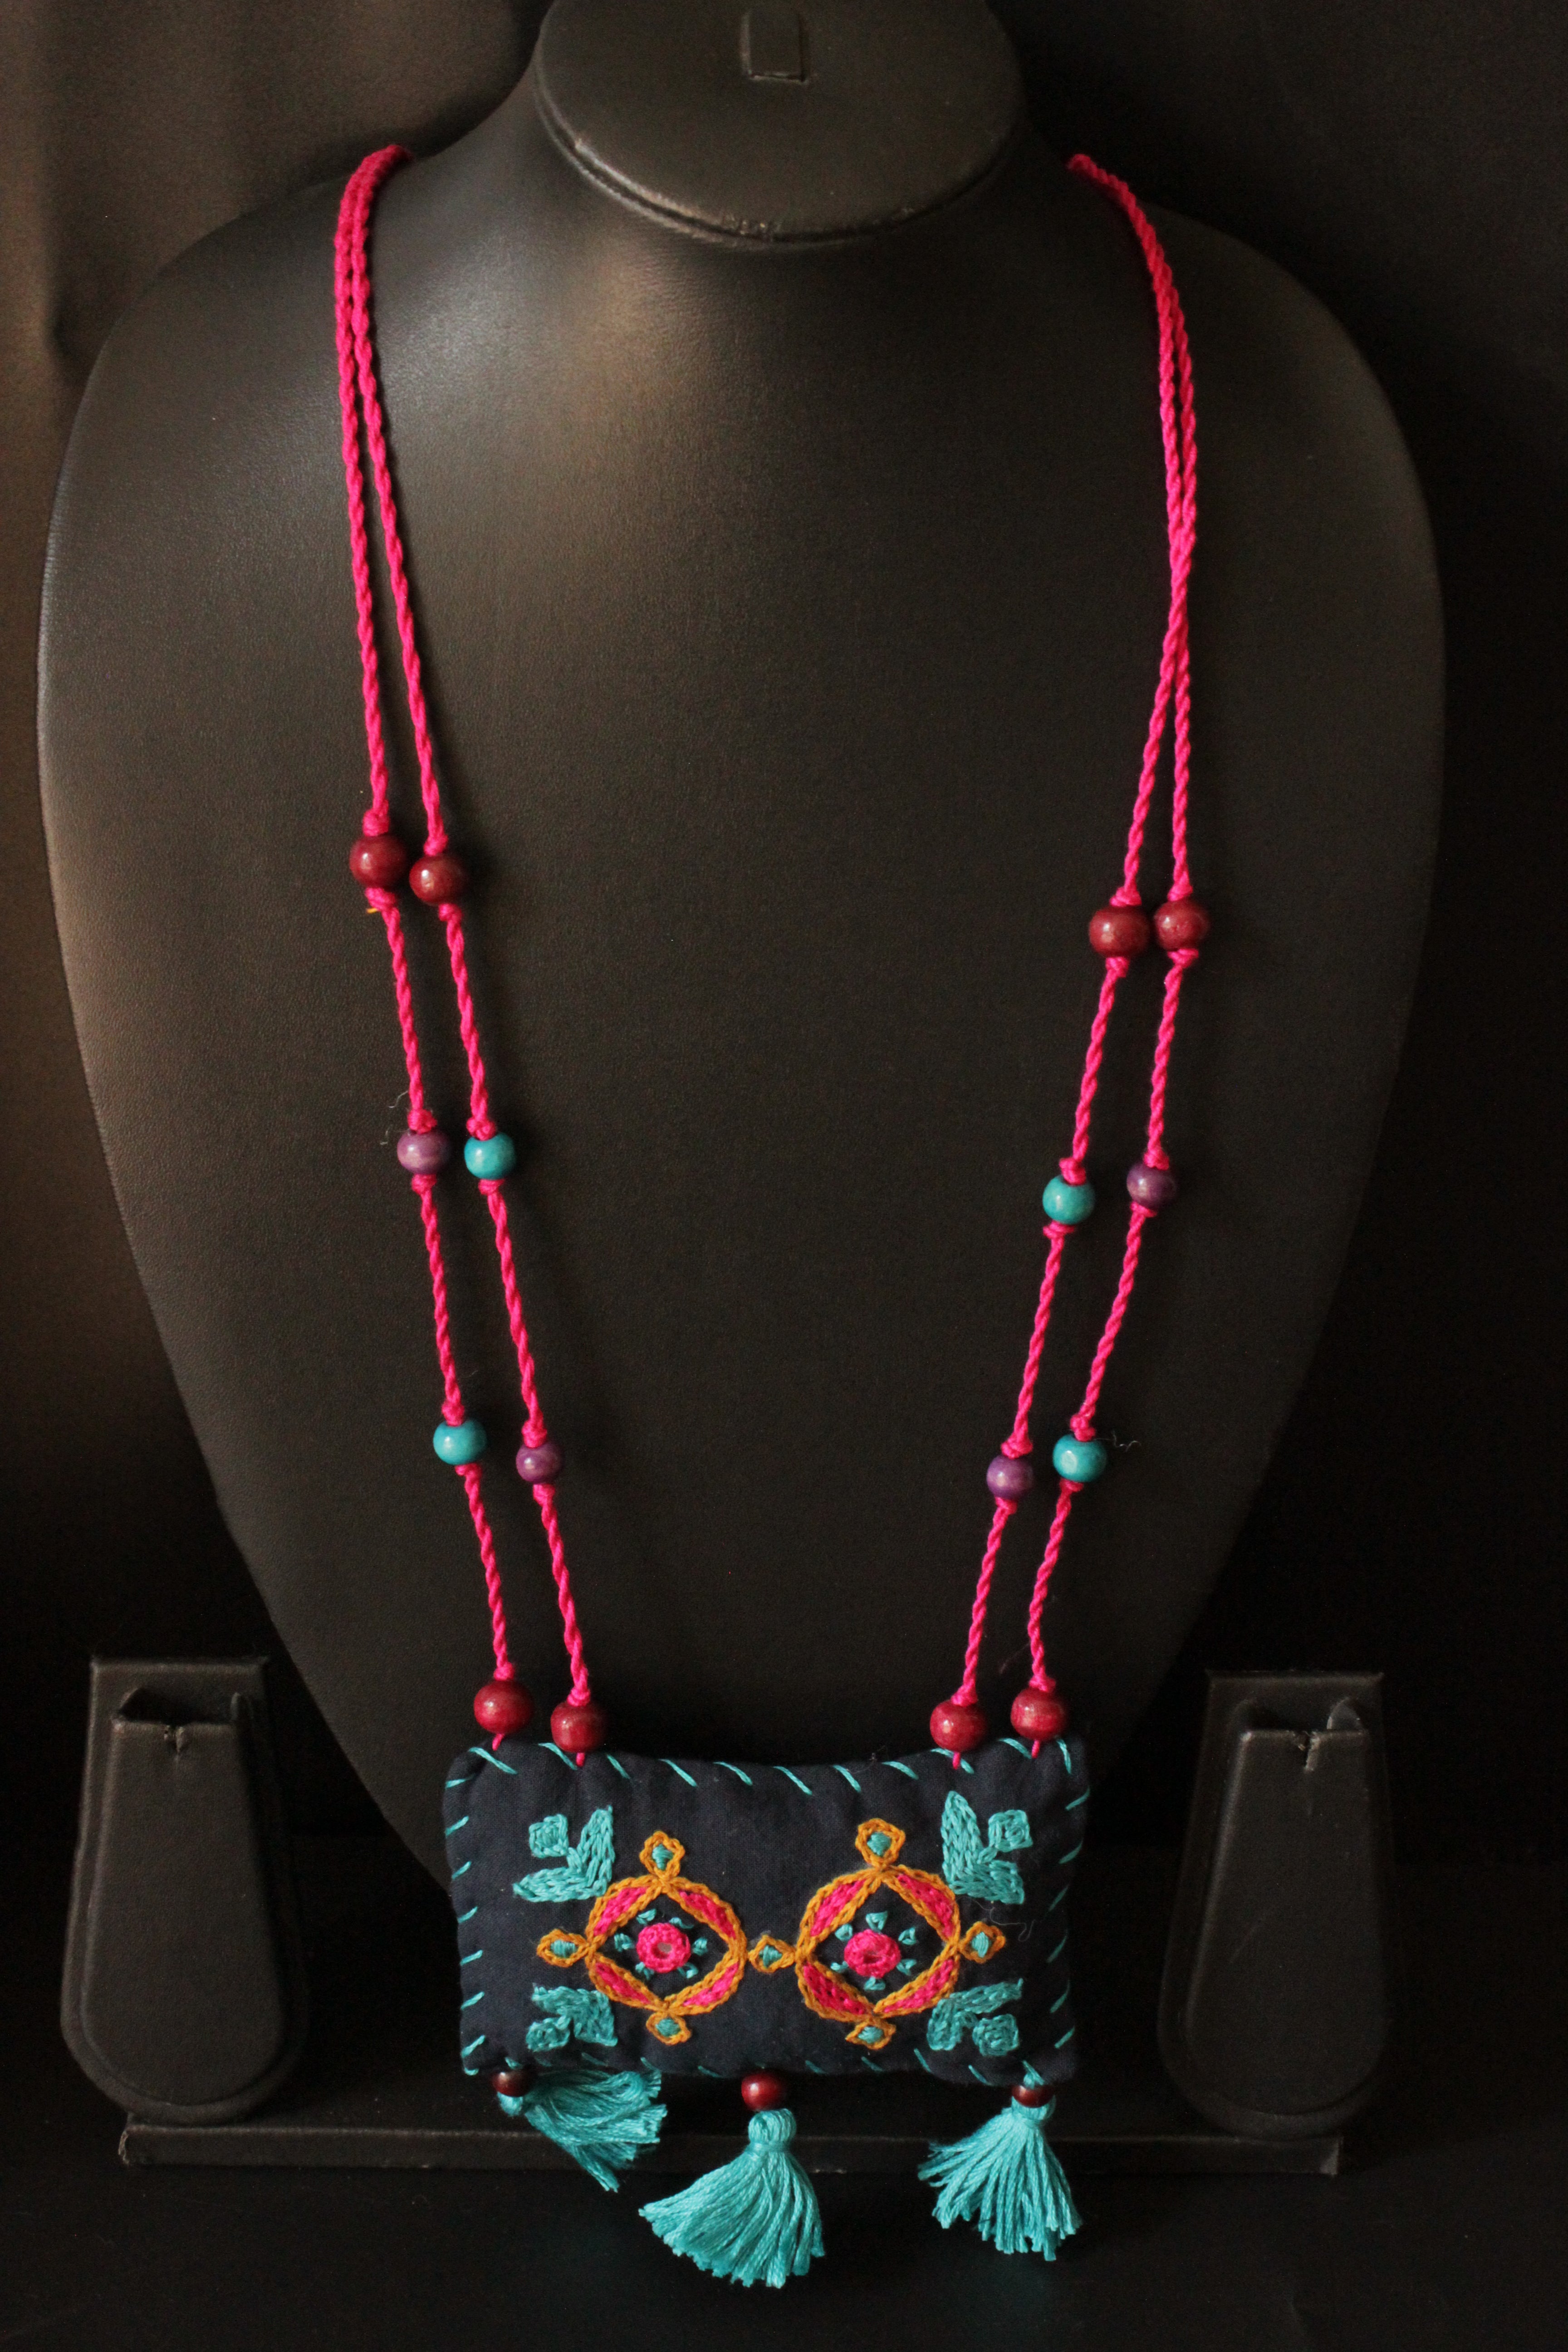 Black and Multi-Color Cross-Stitch Handcrafted Rope Closure Handcrafted Fabric Necklace